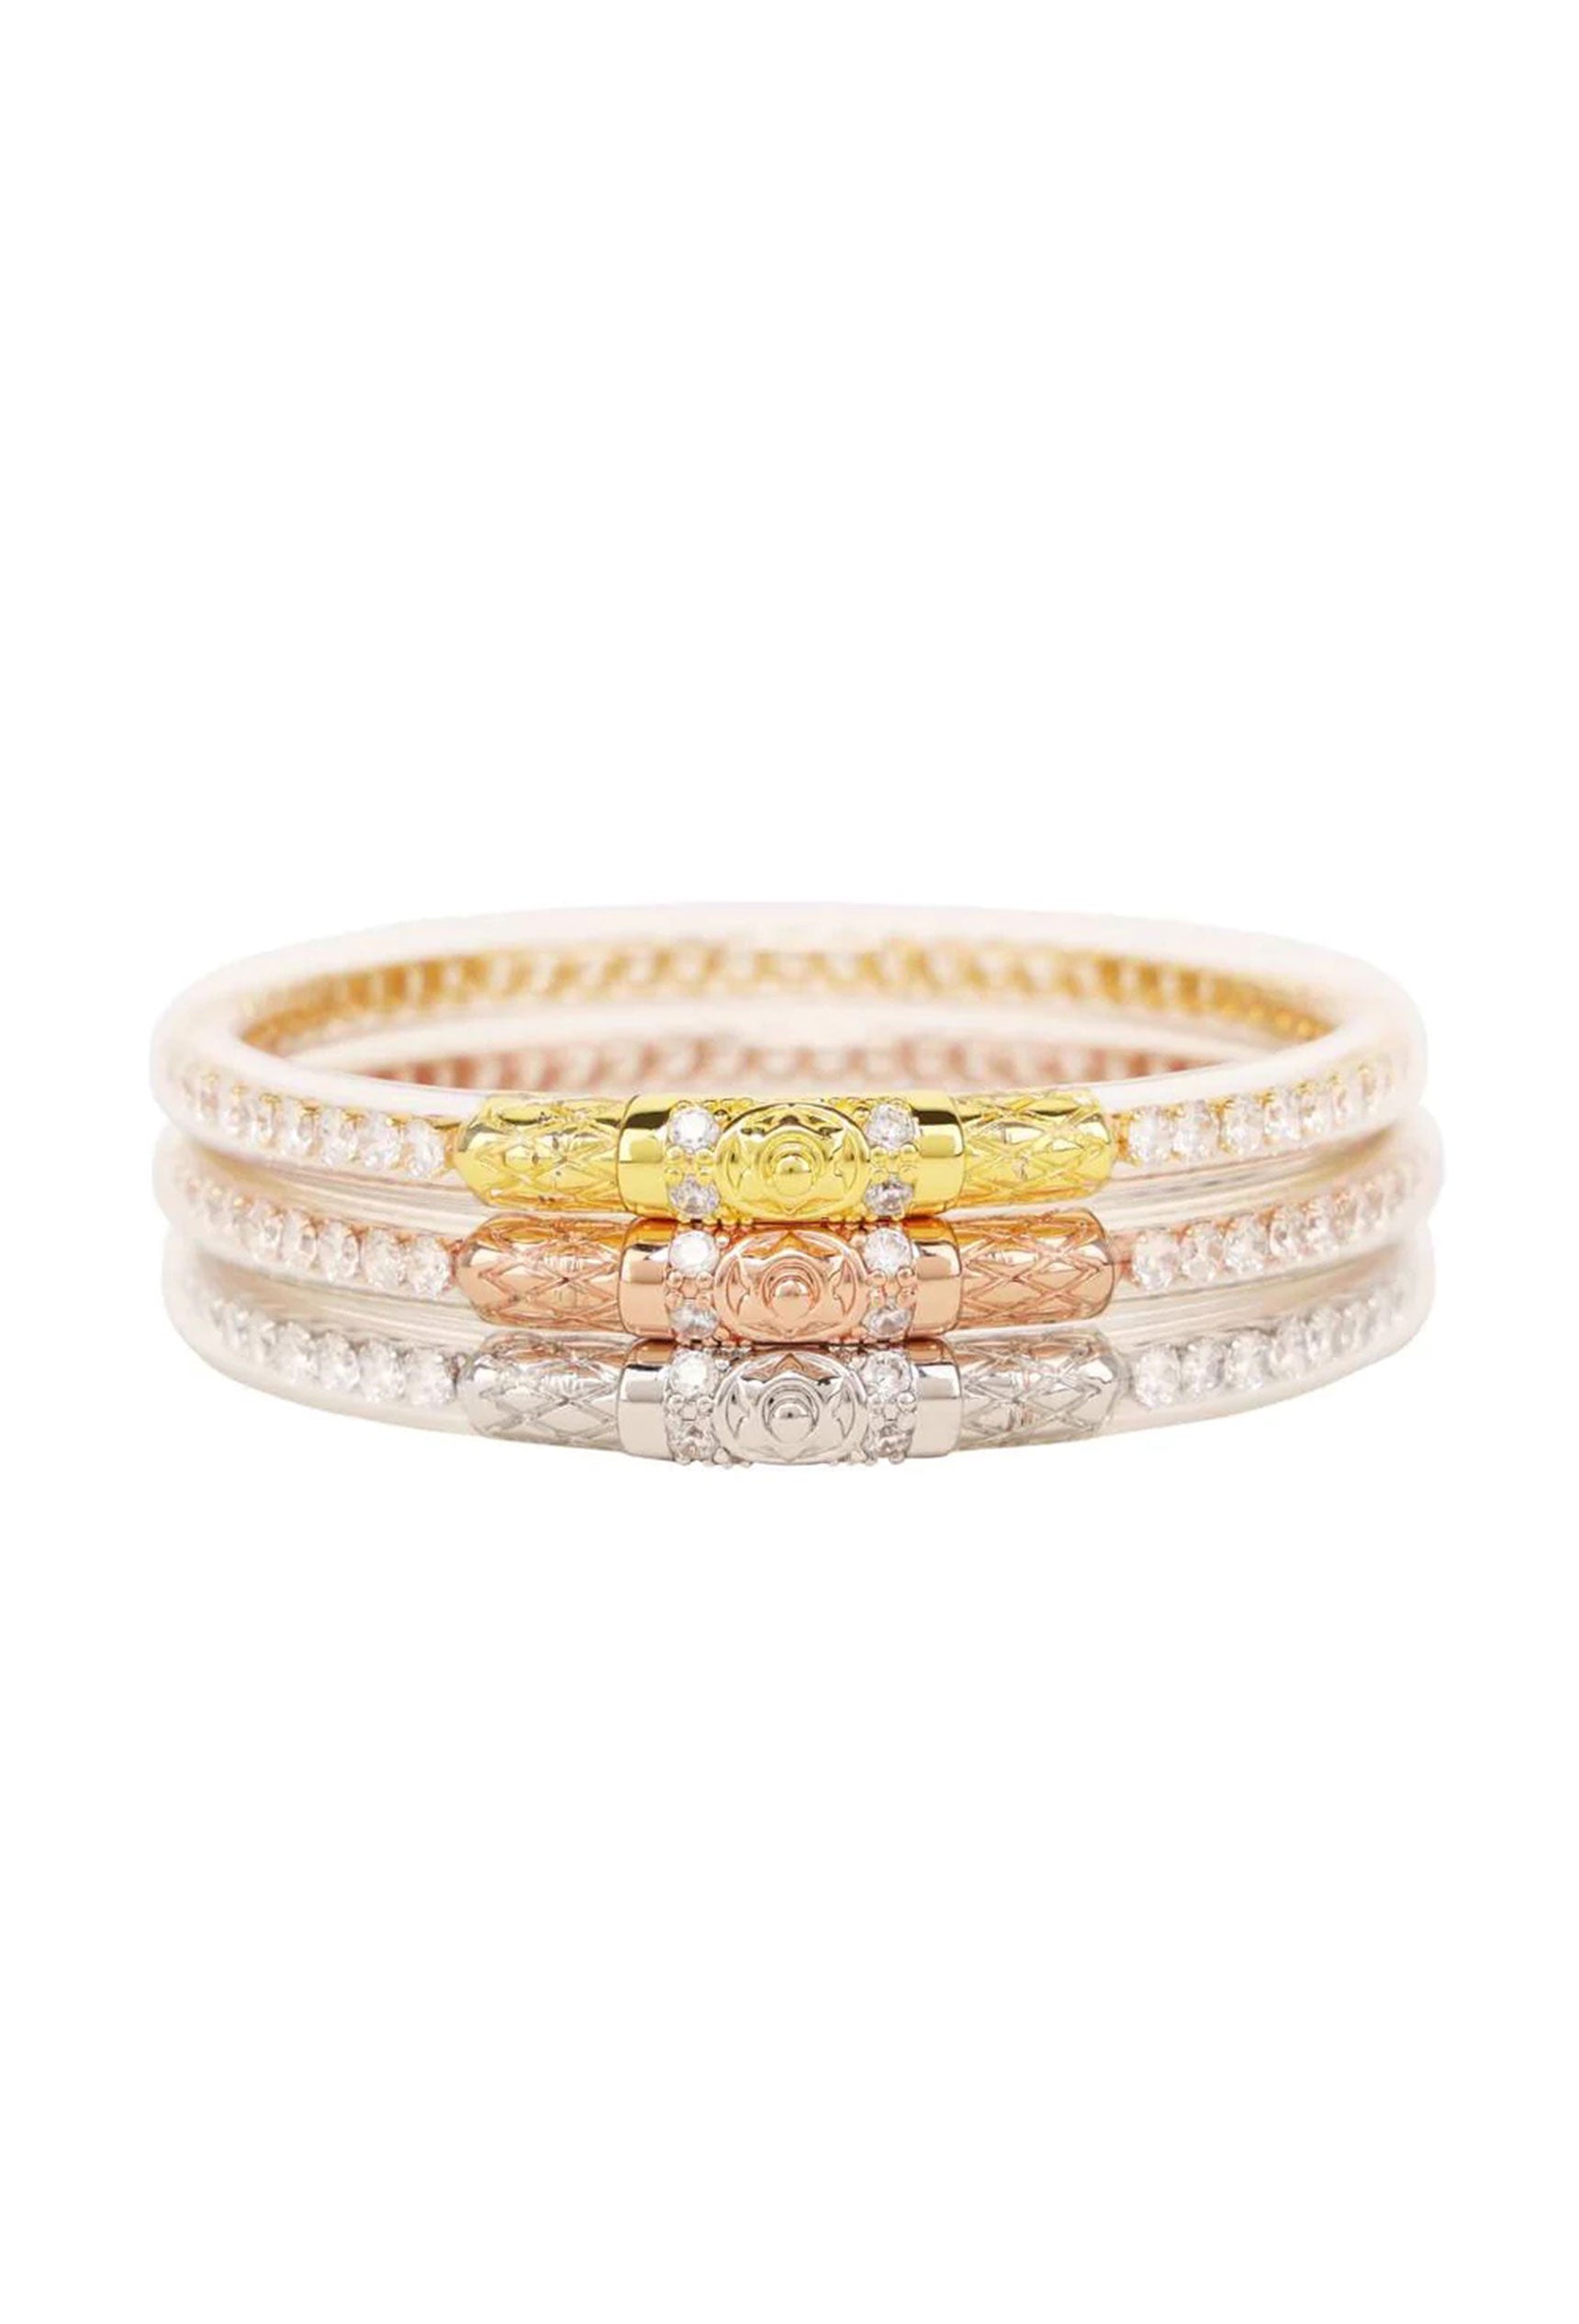 BUDHAGIRL Three Queens Bangles in Clear Crystal, set of three bangles, one gold, one silver snd one rose gold